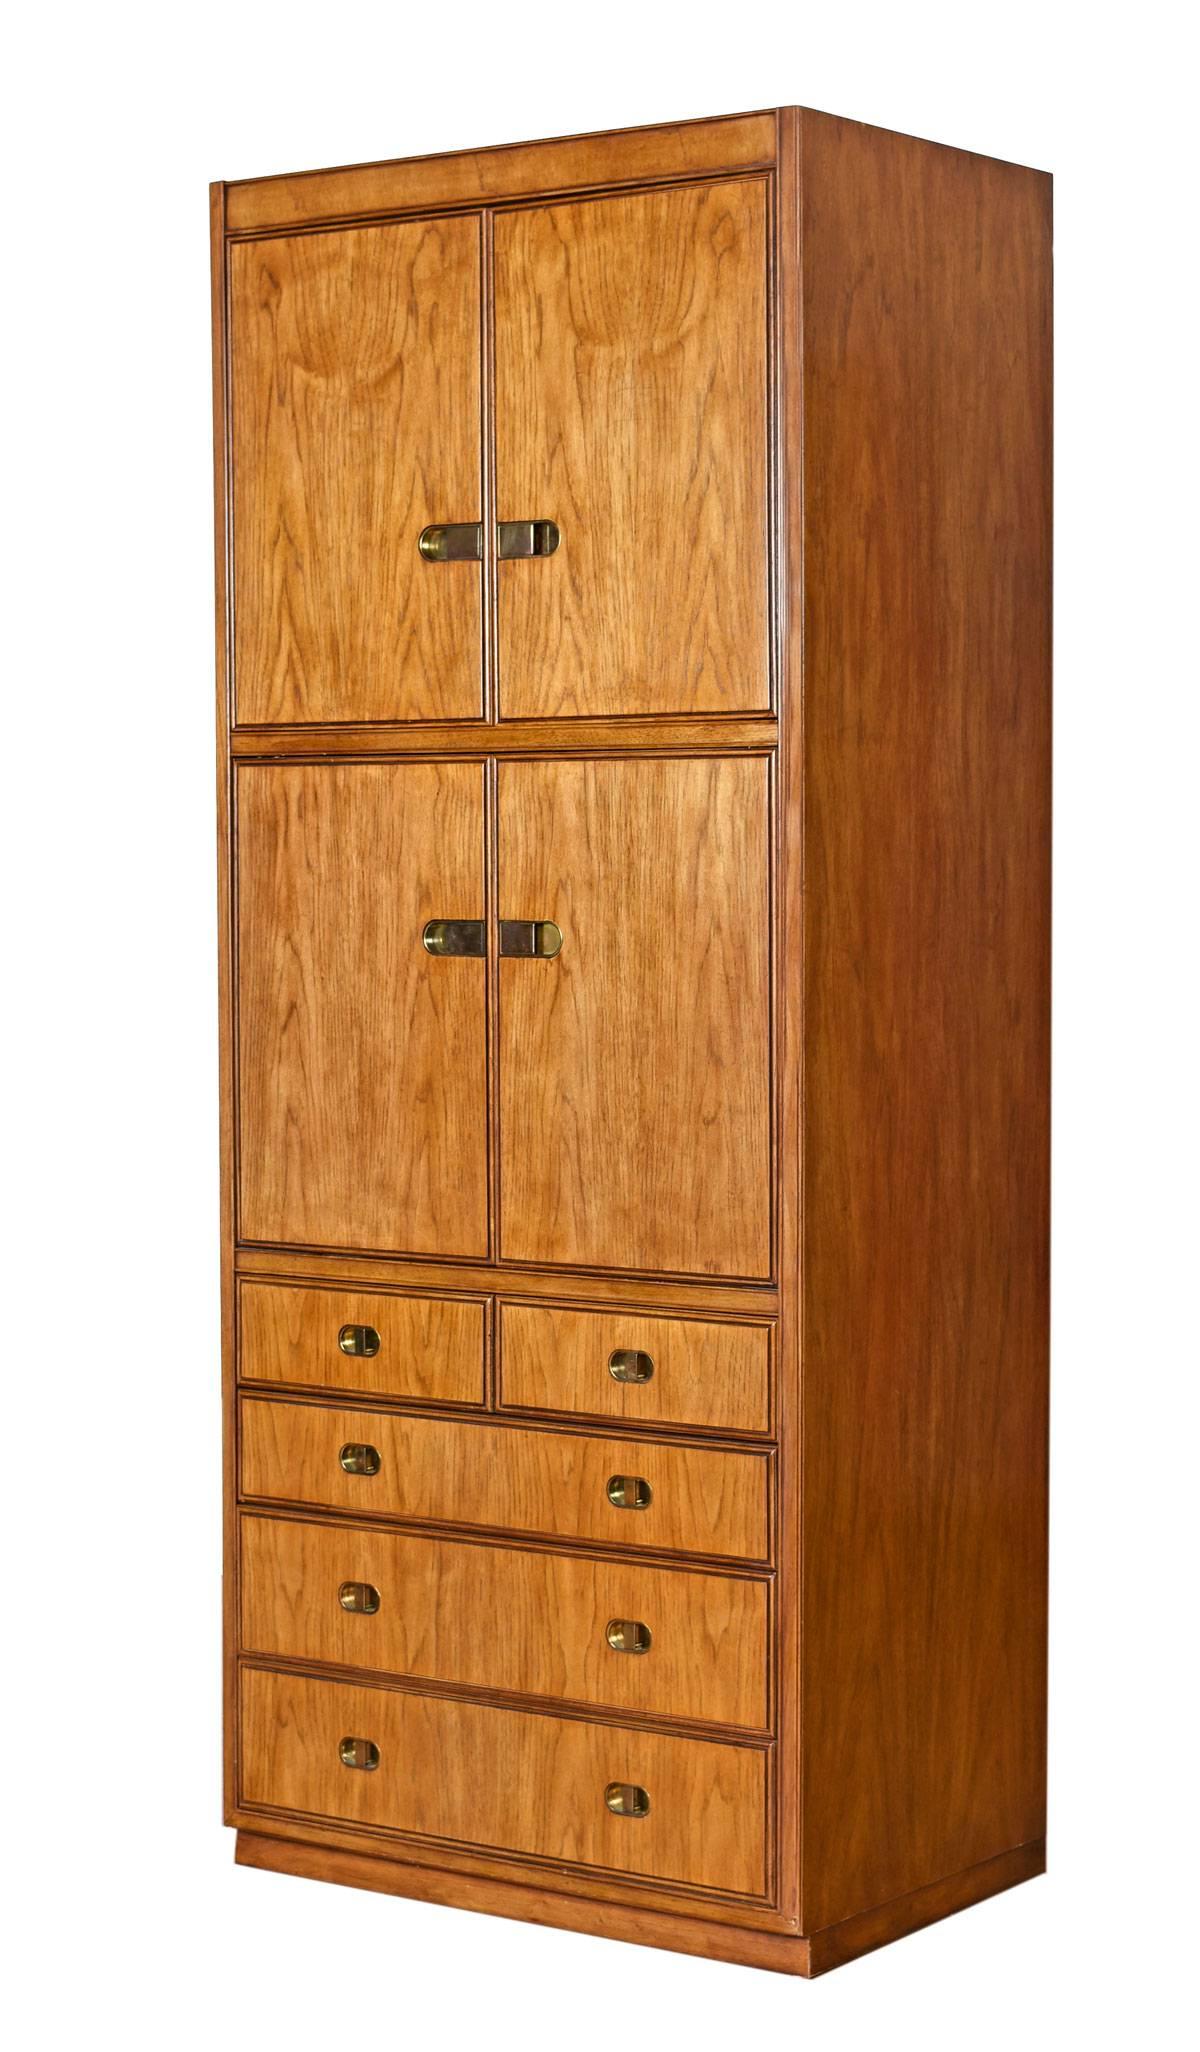 Pair of Mid-Century Modern illuminated cabinets by Drexel Heritage from the Preface Collection. The set is decorated with original brass hardware, made of pecan wood, and dates to the 1970s.These tall shelving towers are slightly different in their